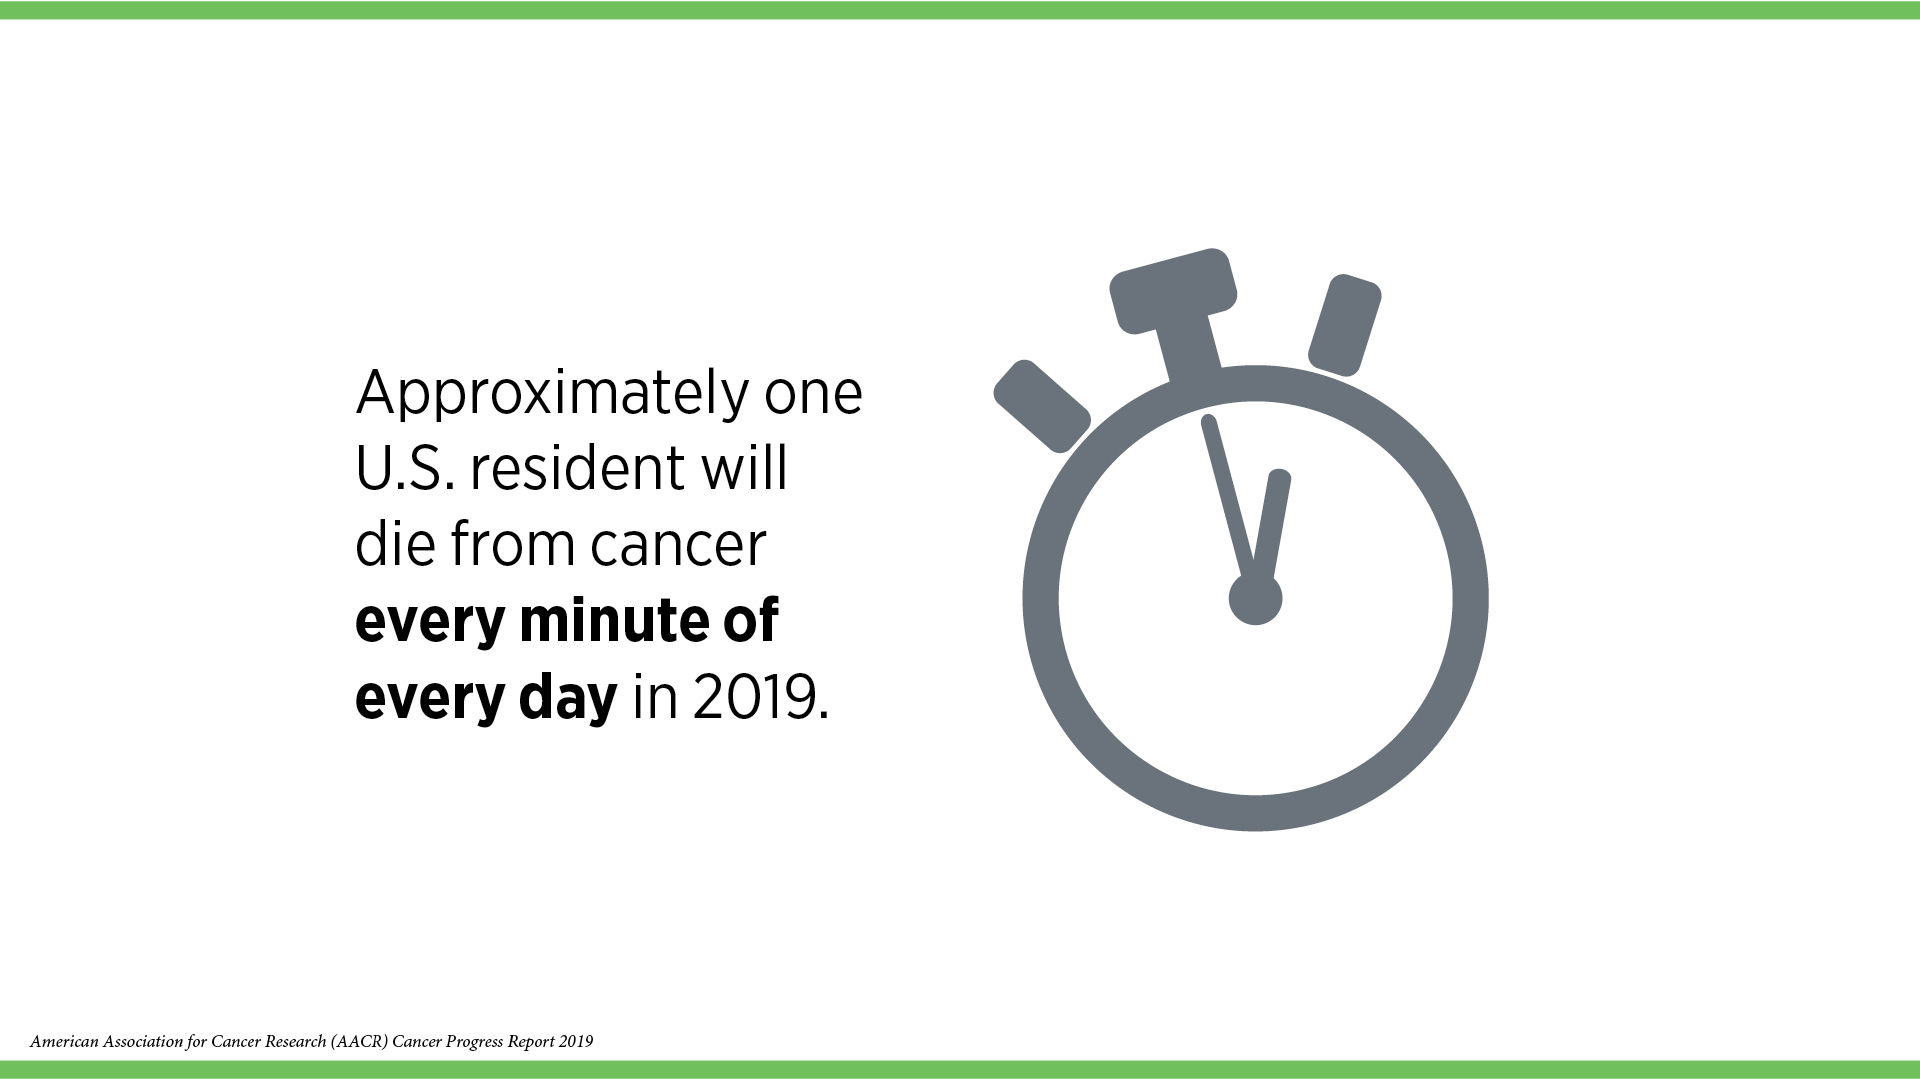 The AACR Cancer Progress Report 2019 states that approximately one U.S. resident will die from cancer every minute of everyday in 2019